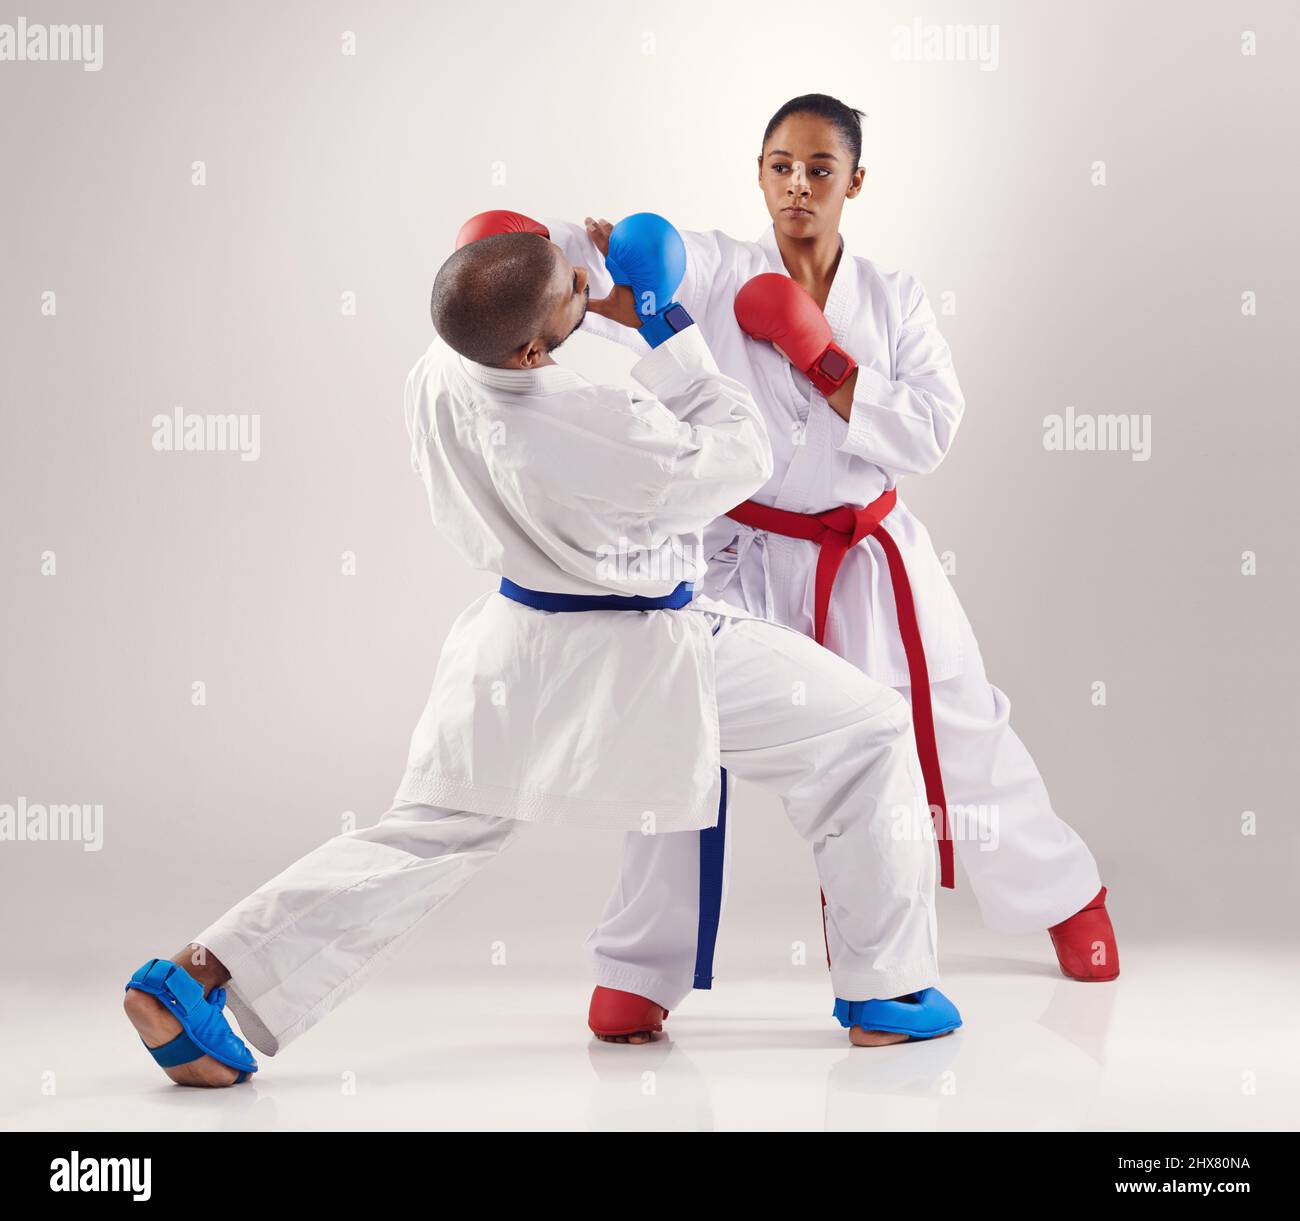 Avoiding her punches. Two people doing karate. Stock Photo